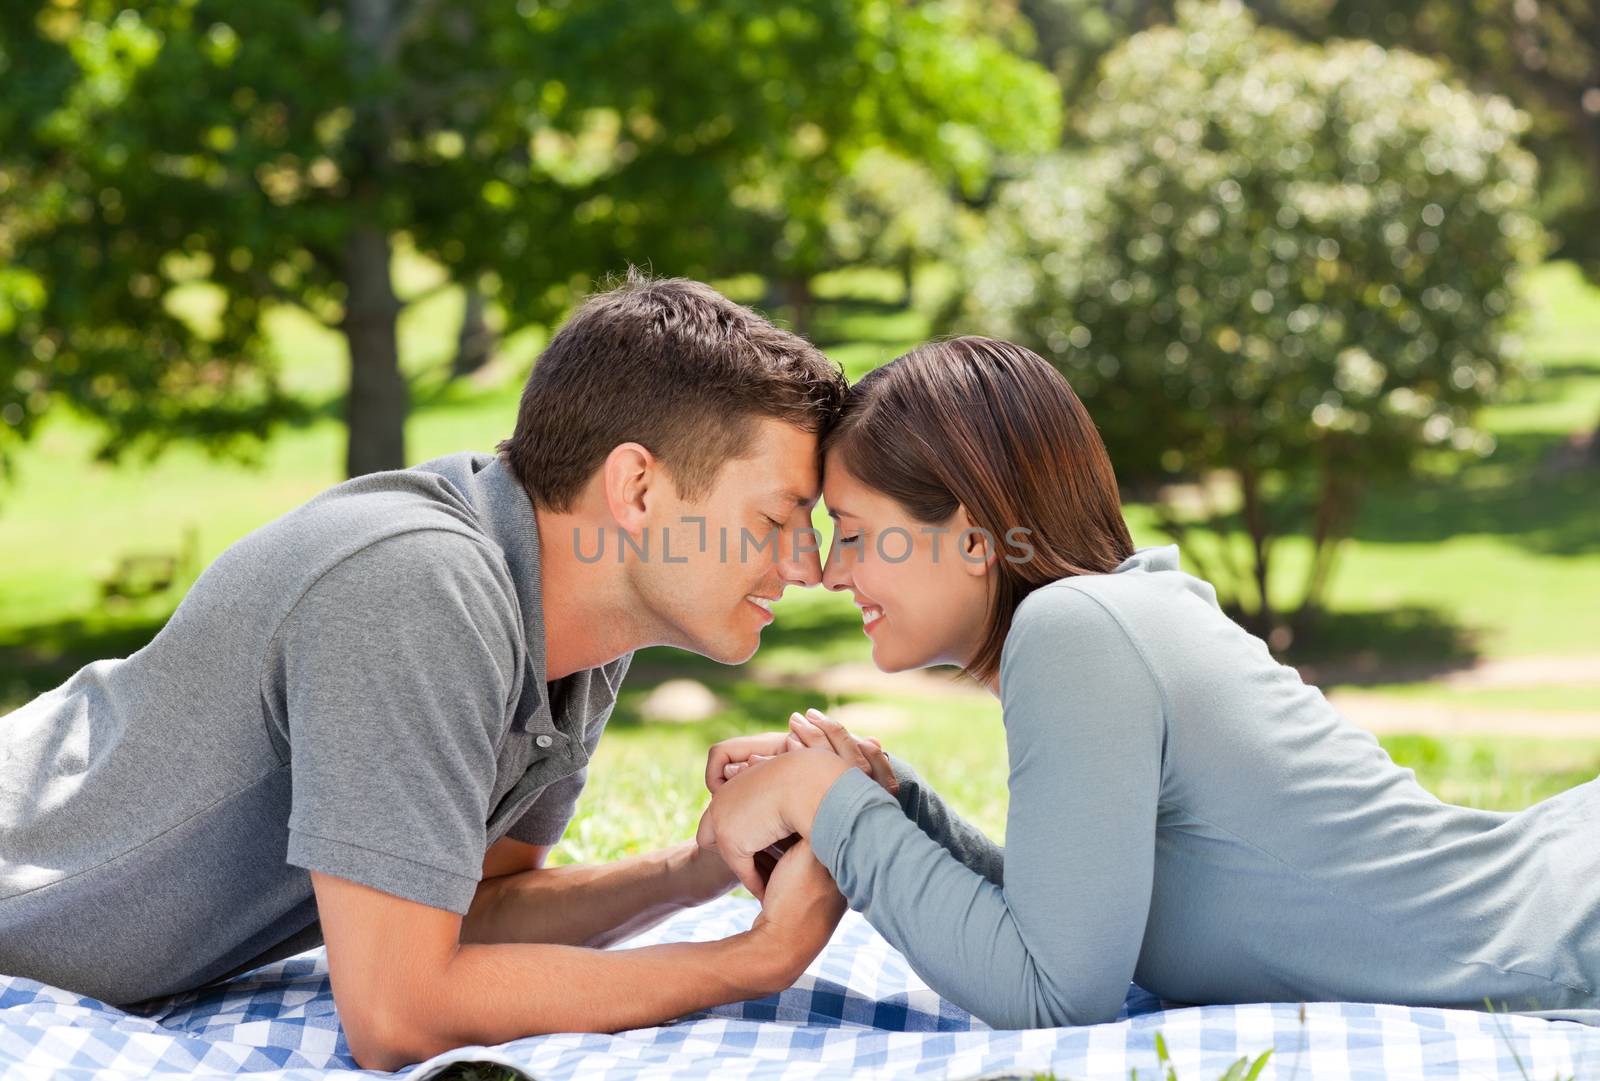 Enamored couple in the park during the summer